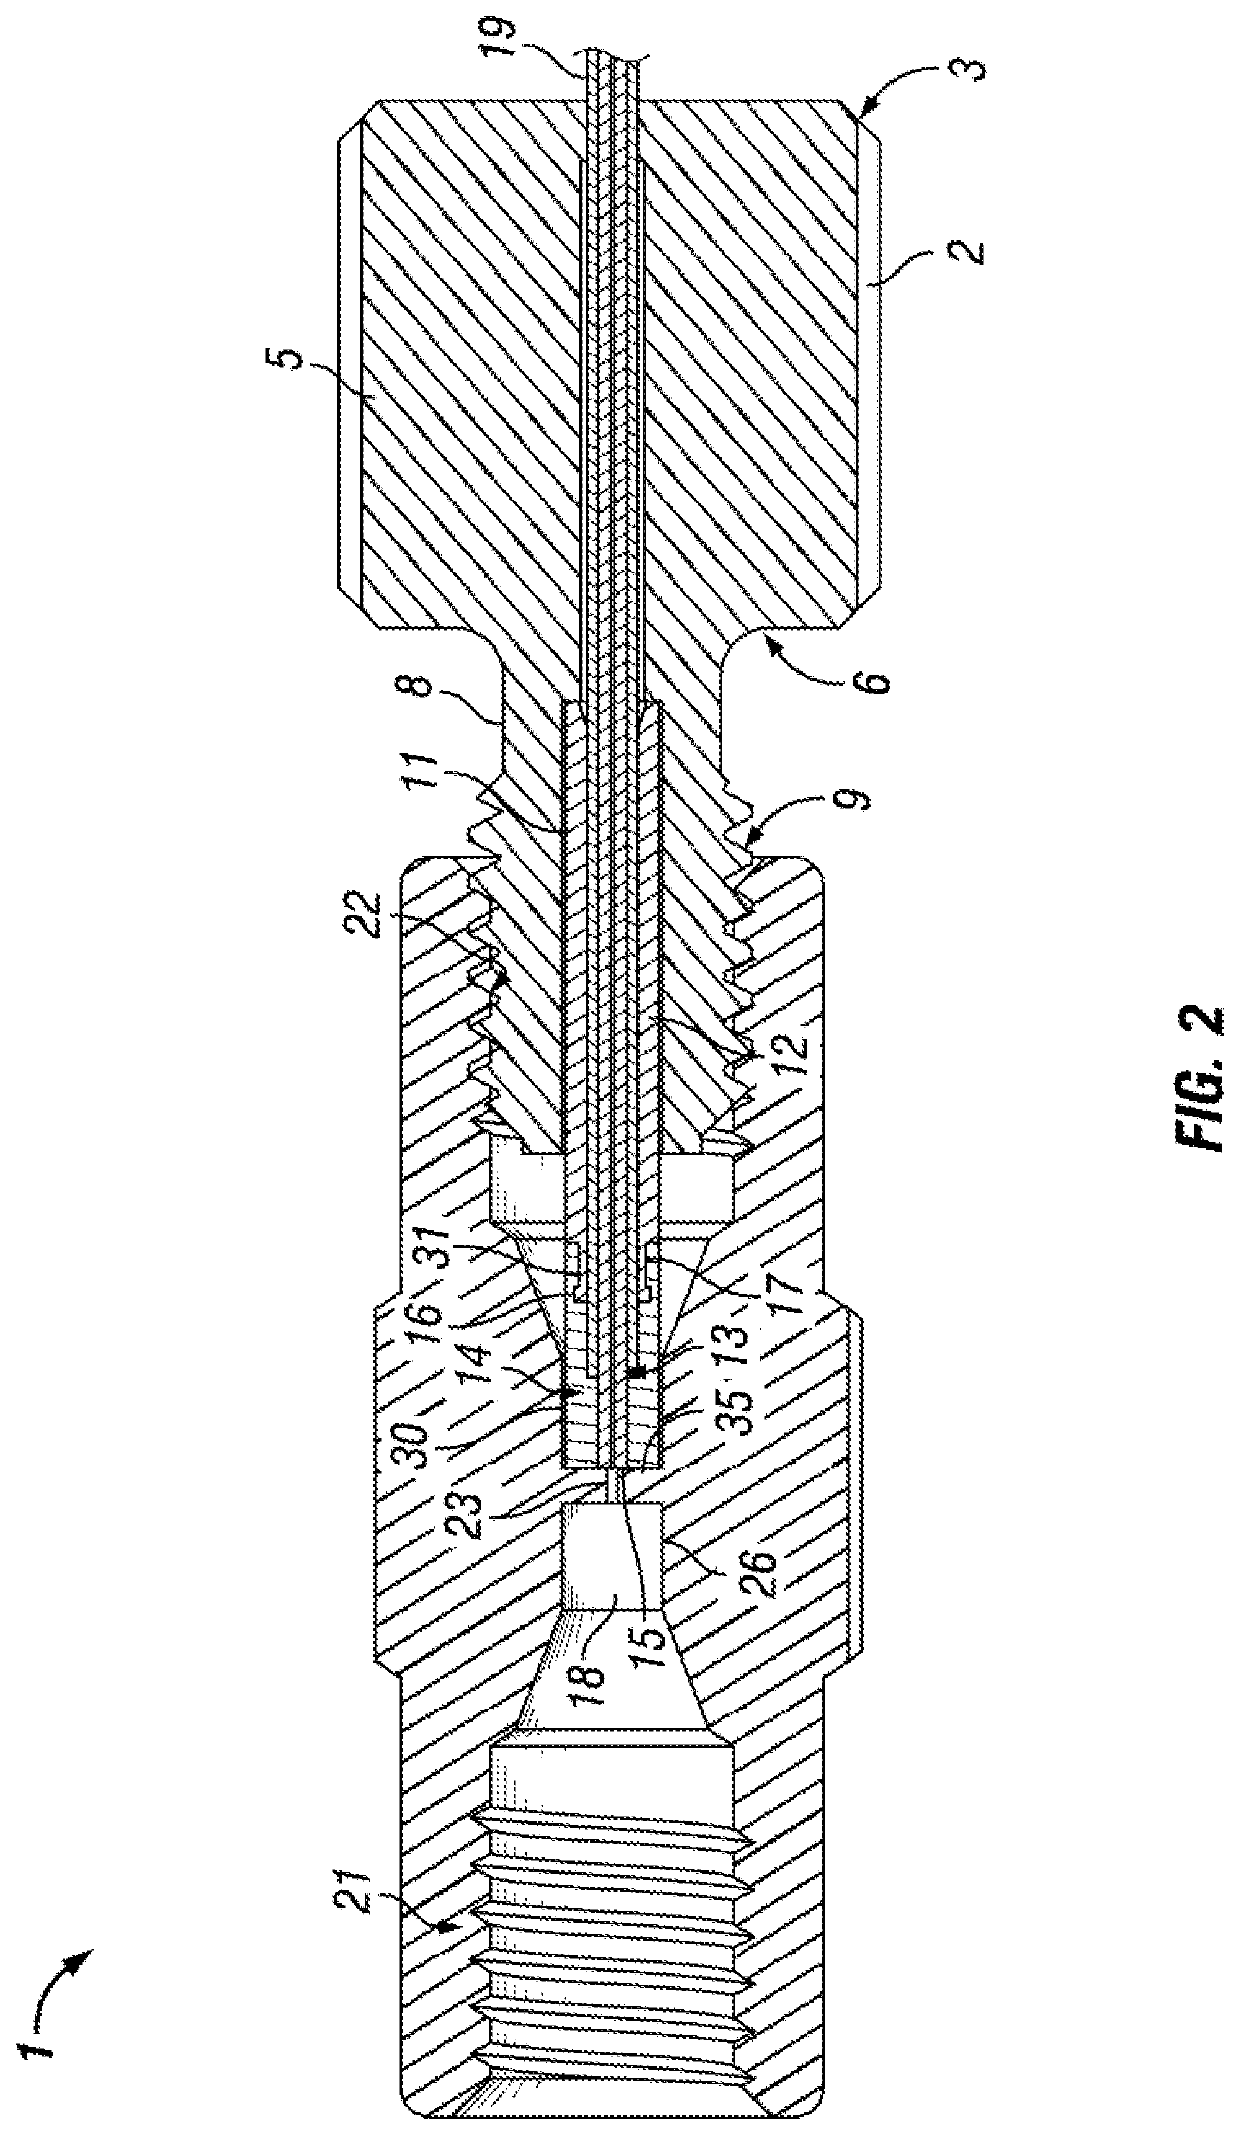 Face-Sealing Fluidic Connection System